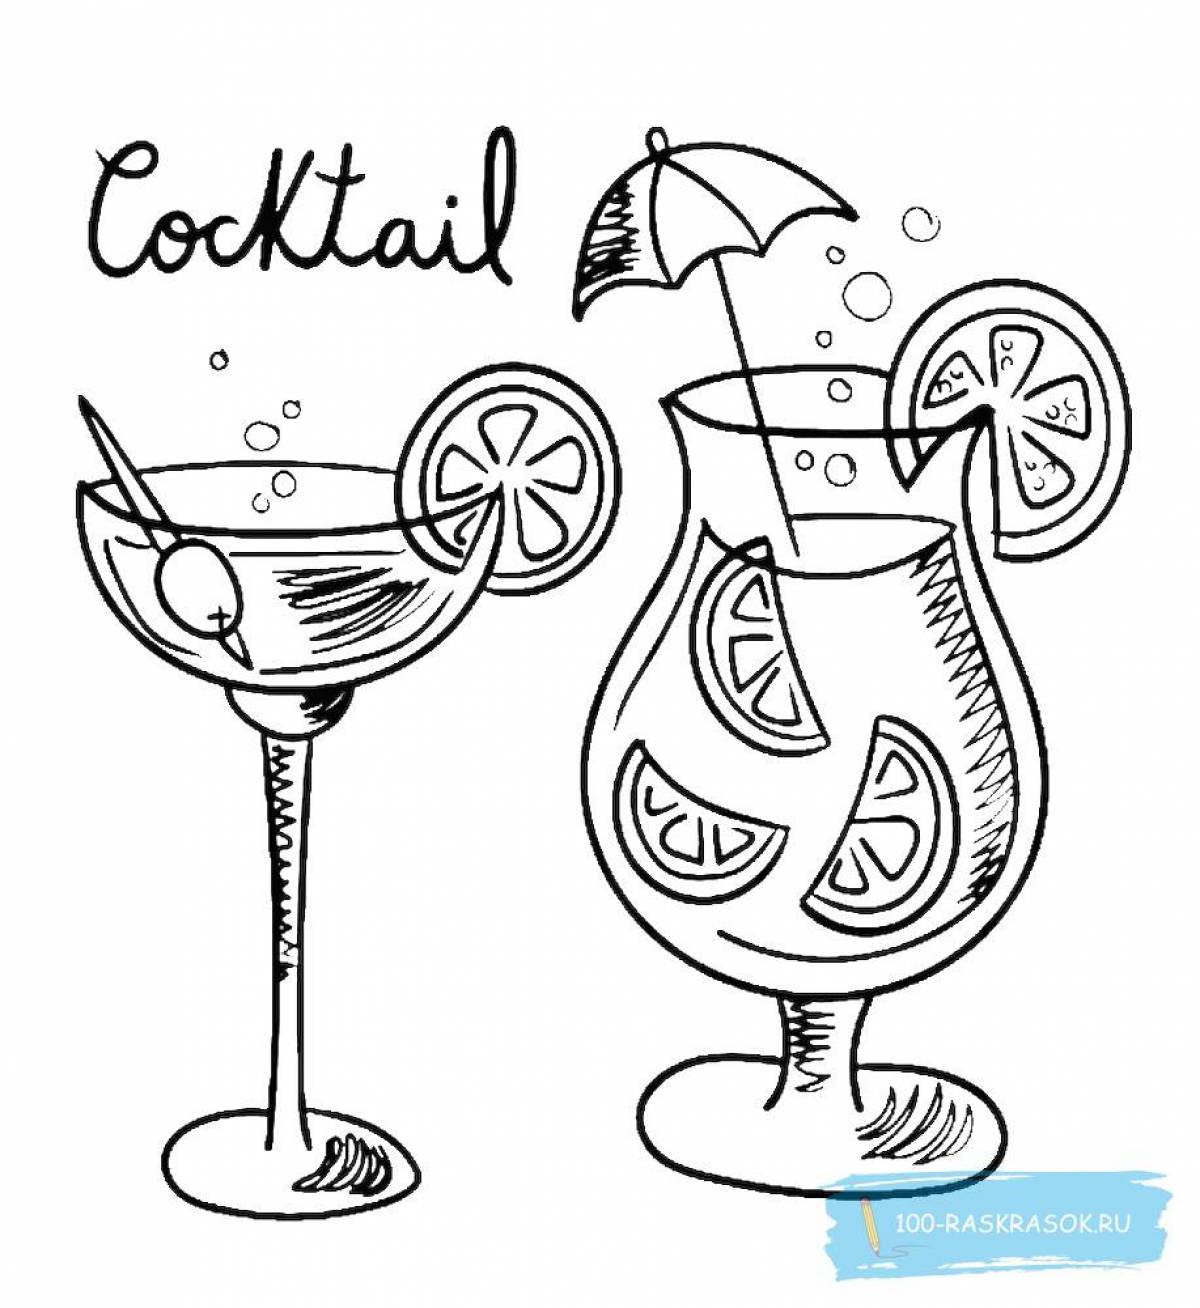 Colourful cocktail coloring book